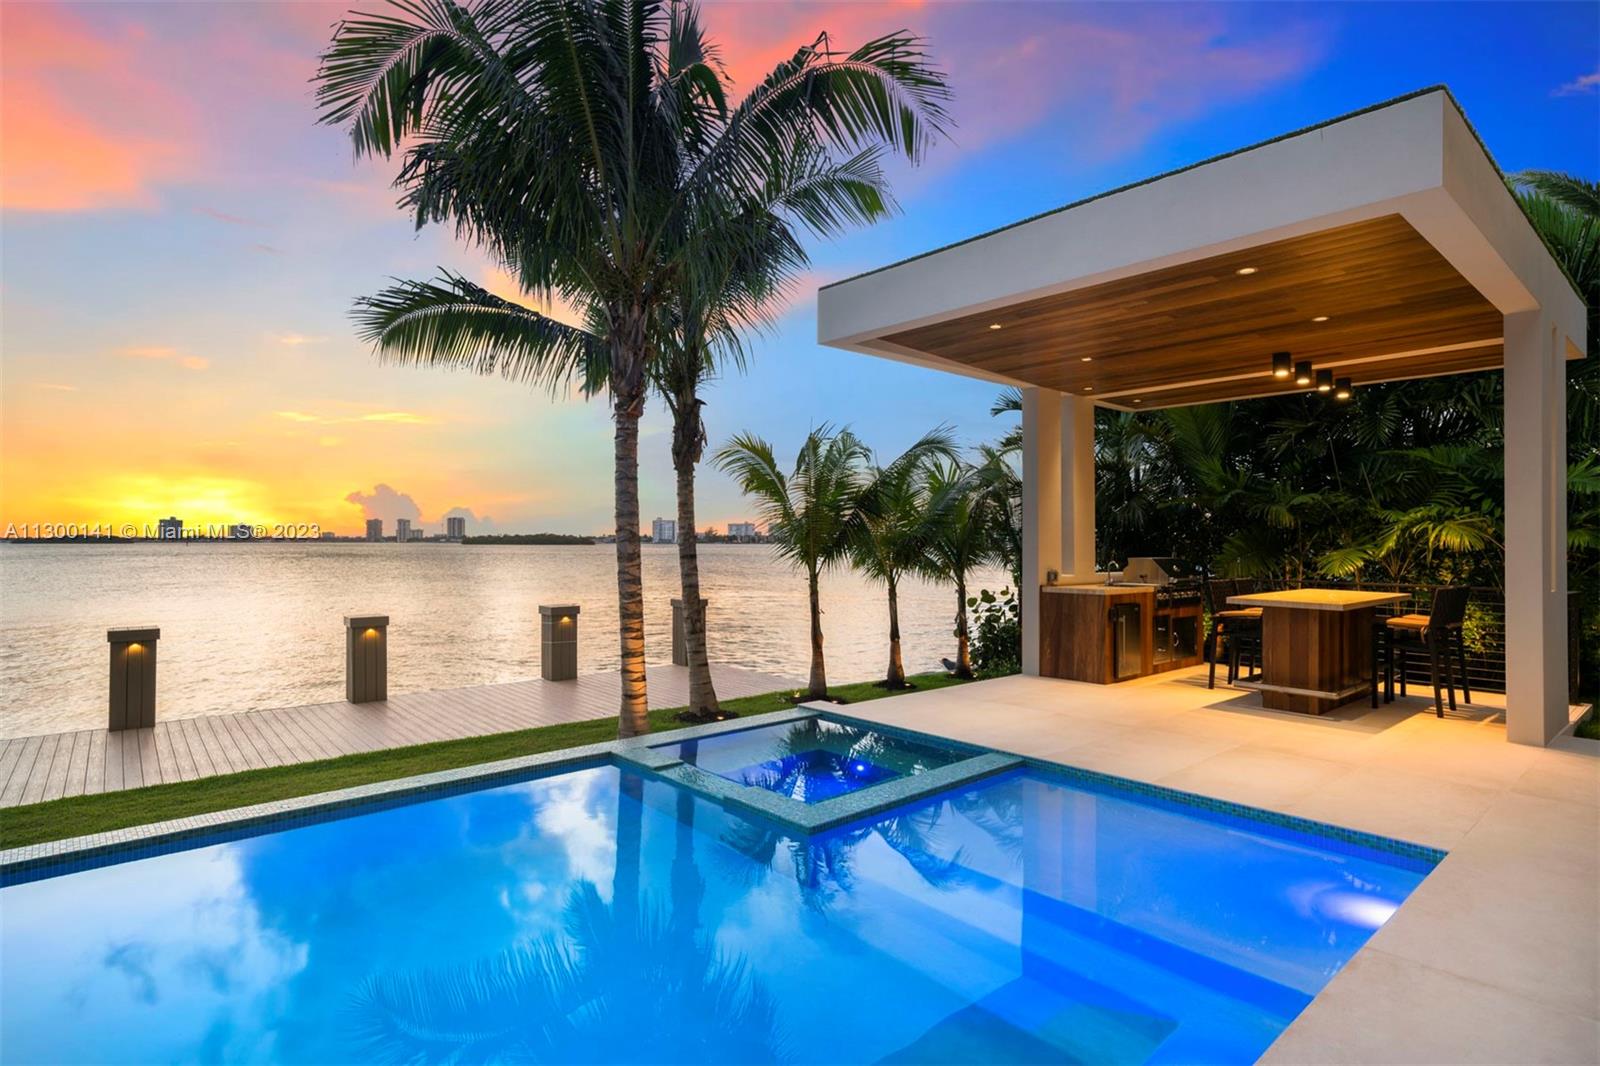 This tropical modern masterpiece w/ architecture by Choeff Levy Fischman, interior design by CBDesign, developed by Gamma Construction, evokes the essence of Miami Beach sophistication. Enjoy unique open water & Indian Creek golf course views from this waterfront marvel where the indoors flow seamlessly to the outside. Modern yet functional design, this estate is an entertainer’s dream w/ 9,000+ SF & 80’ on the water. Features: 2 full high-end kitchens w/ Sub-Zero & Wolf appliances, elevator, gym, wine room, 2 family rooms, home automation, natural herringbone wood flooring, walls clad w/ exotic materials, infinity edge pool, spa, private dock. Enjoy breathtaking views from floor-to-ceiling walls of glass & exceptional craftsmanship all moments from world-class dining, shopping,& beaches.